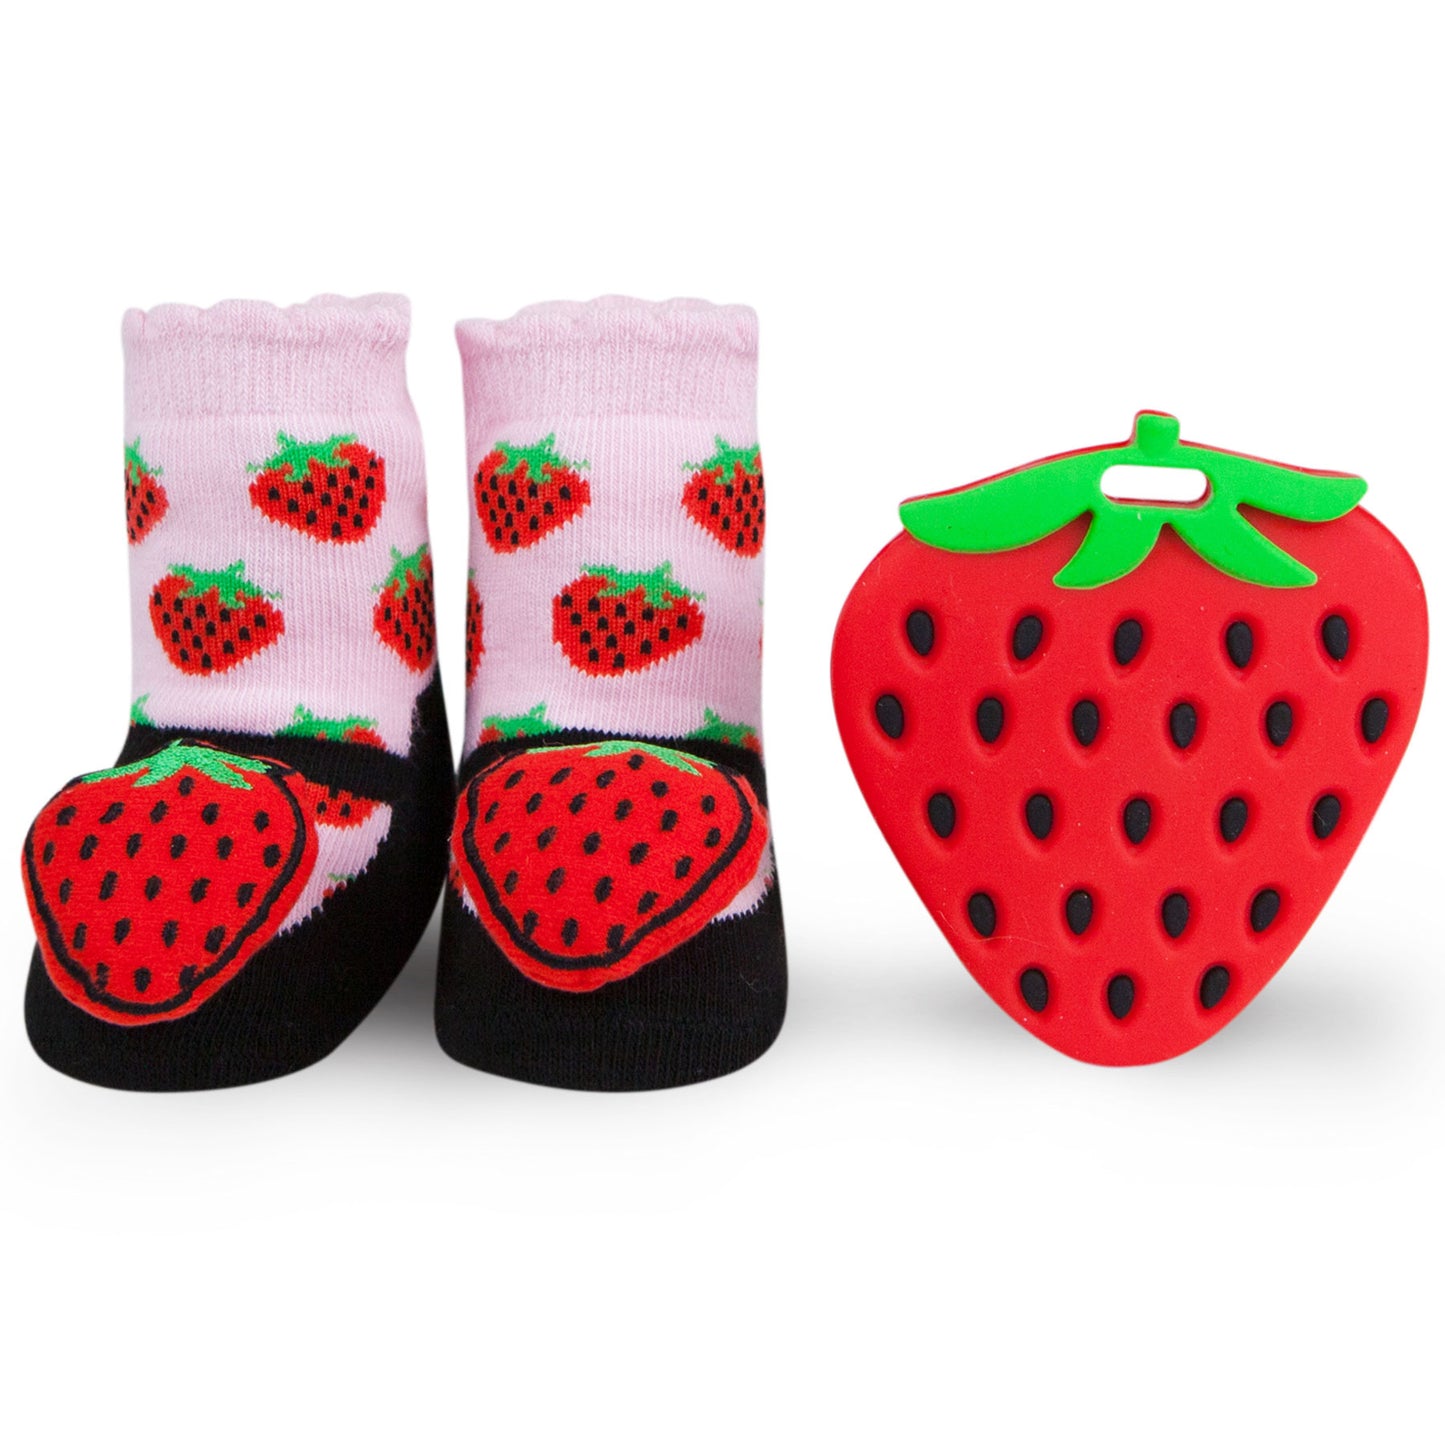 Waddle Socks and Teether Gift Set - Strawberry